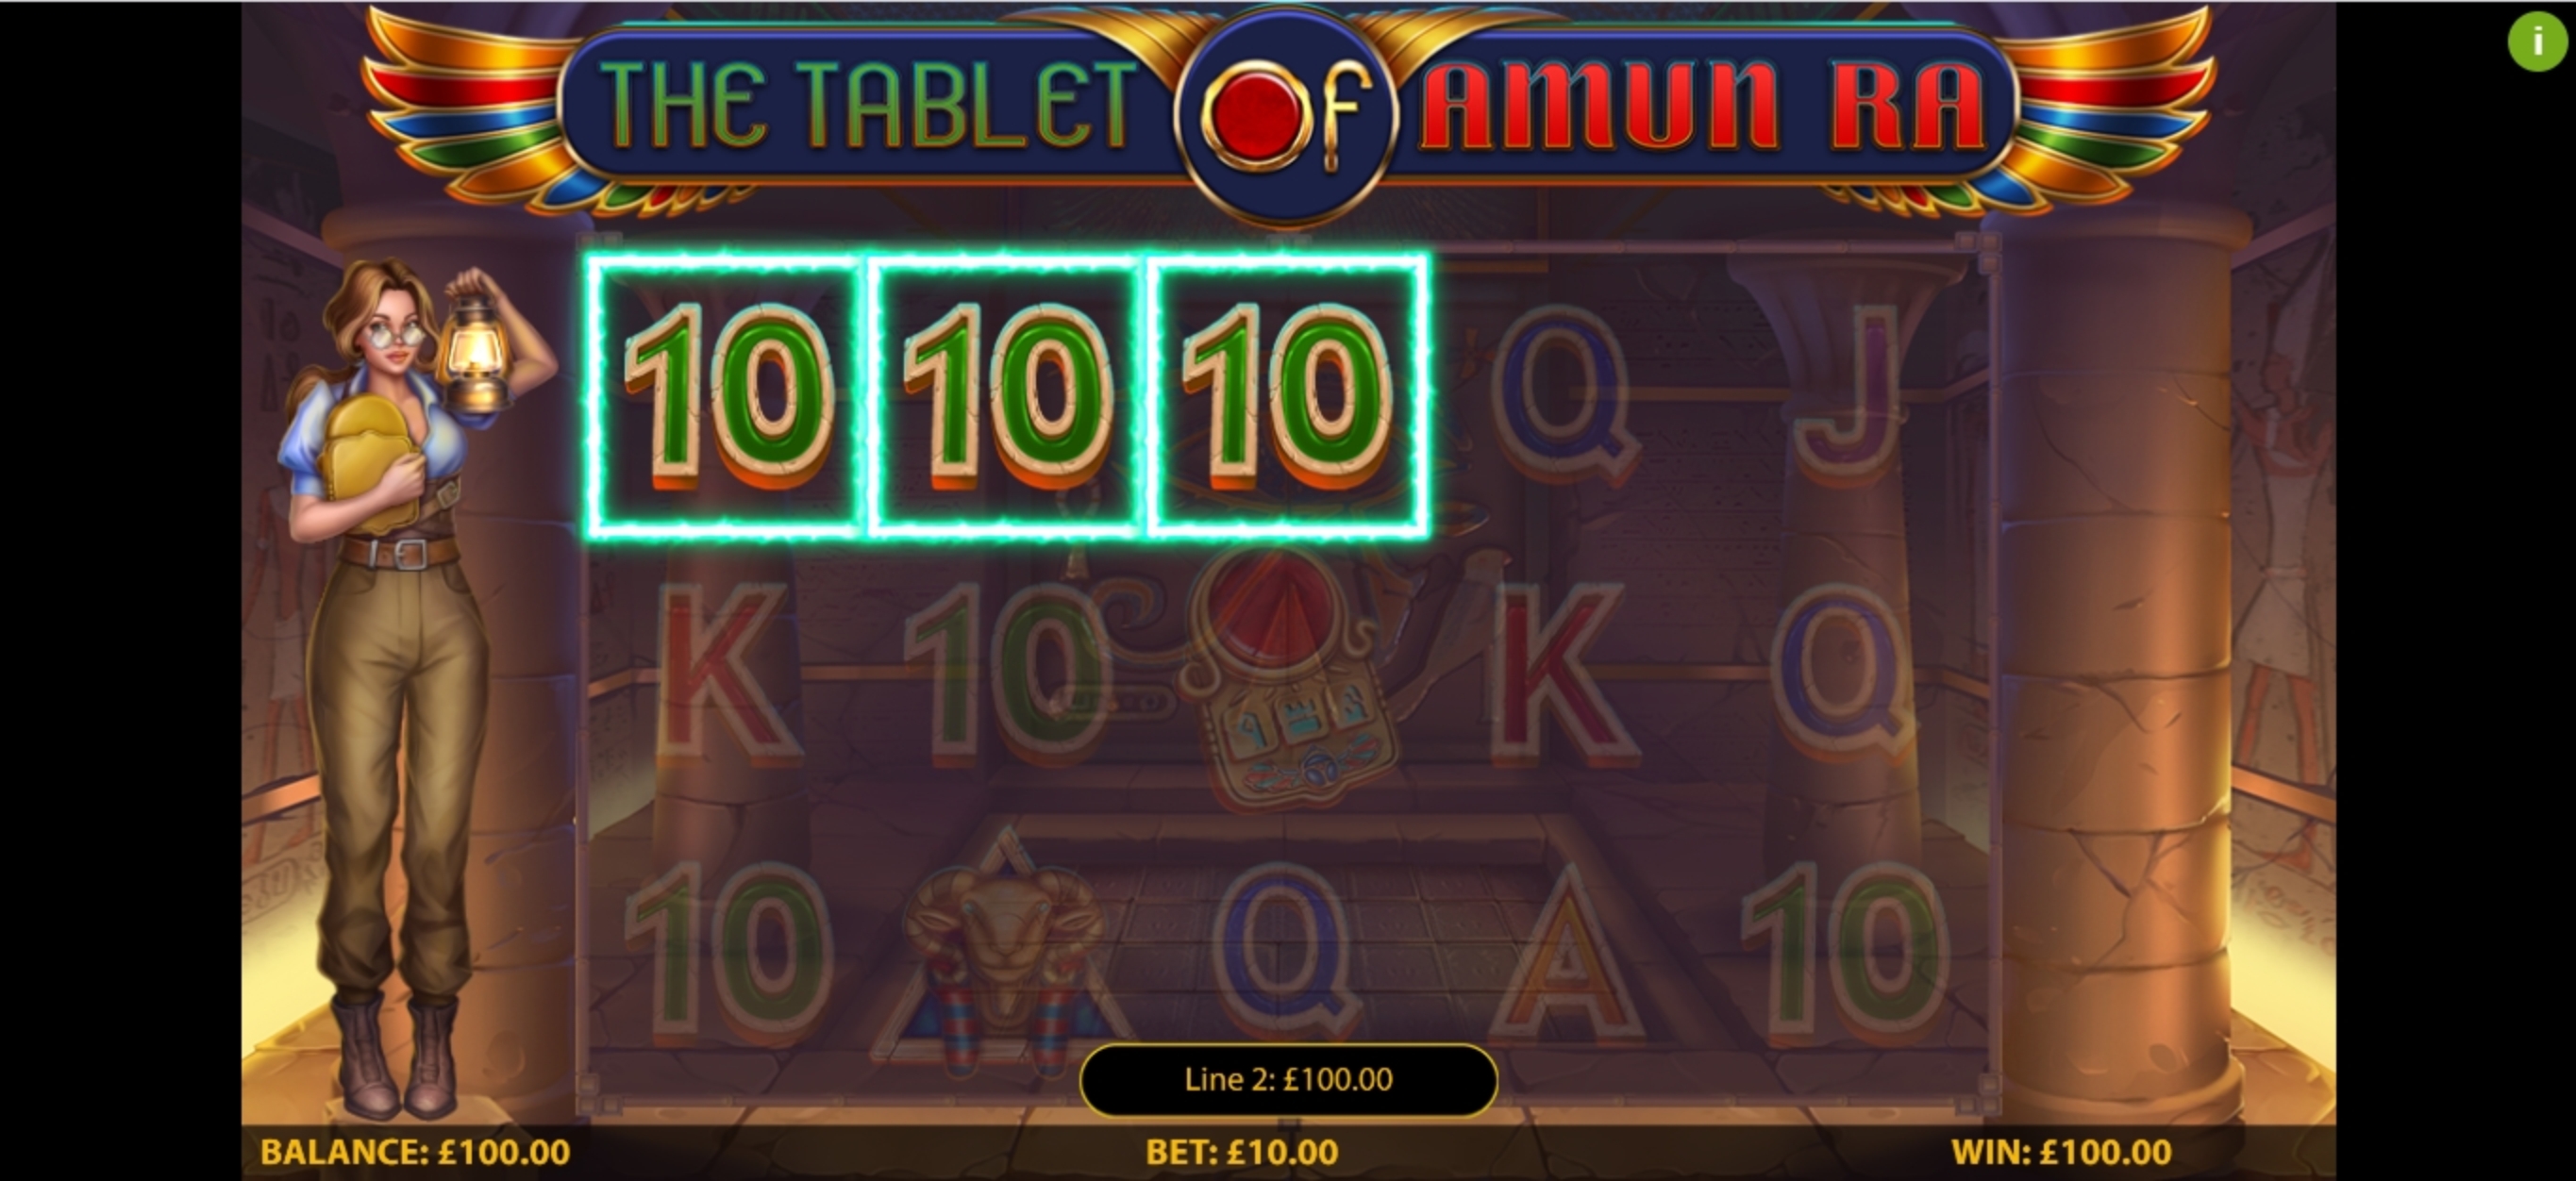 Lowest bet game on jackpot city